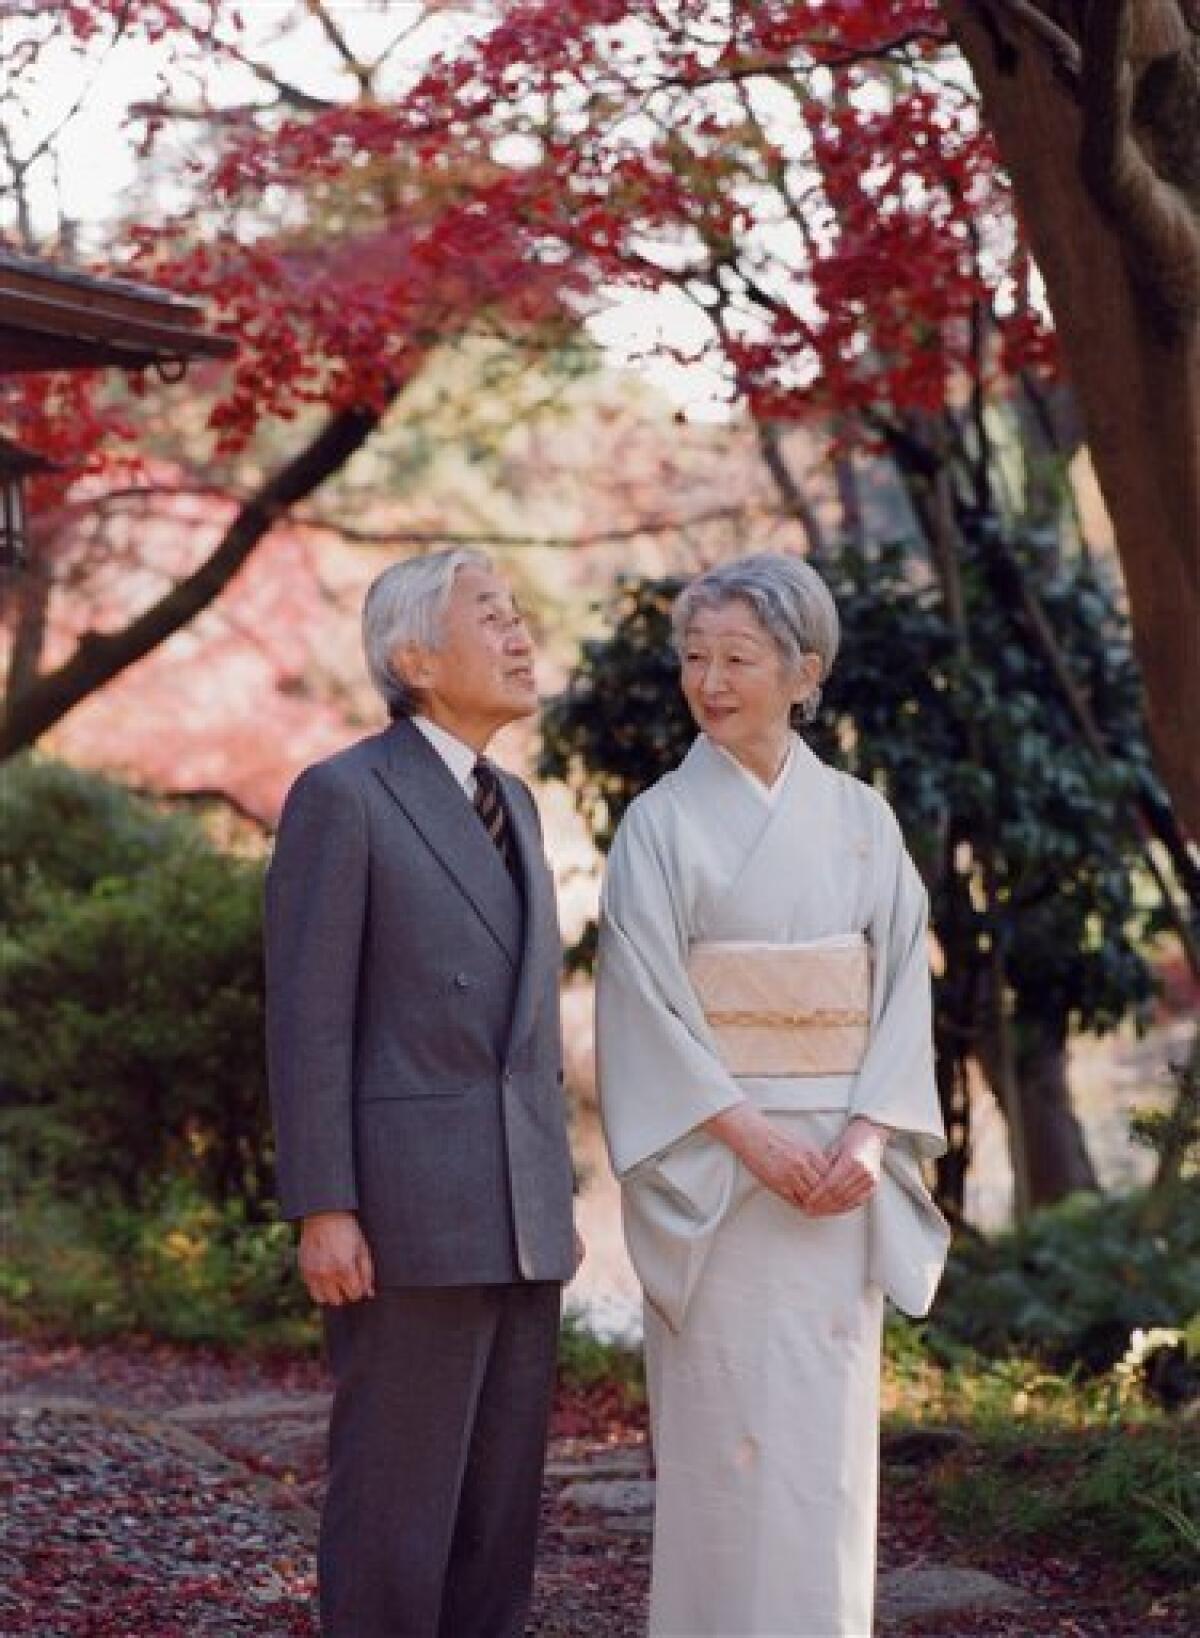 In this photo taken on Monday, Nov. 29, 2010 and released by the Imperial Household Agency of Japan, Emperor Akihito and Empress Michiko admire autumn leaves during their stroll at Fukiage Garden in the Imperial Palace in Tokyo. Akihito celebrates his 77th birthday Thursday, Dec. 23, 2010. (AP Photo/Imperial Household Agency of Japan) EDITORIAL USE ONLY